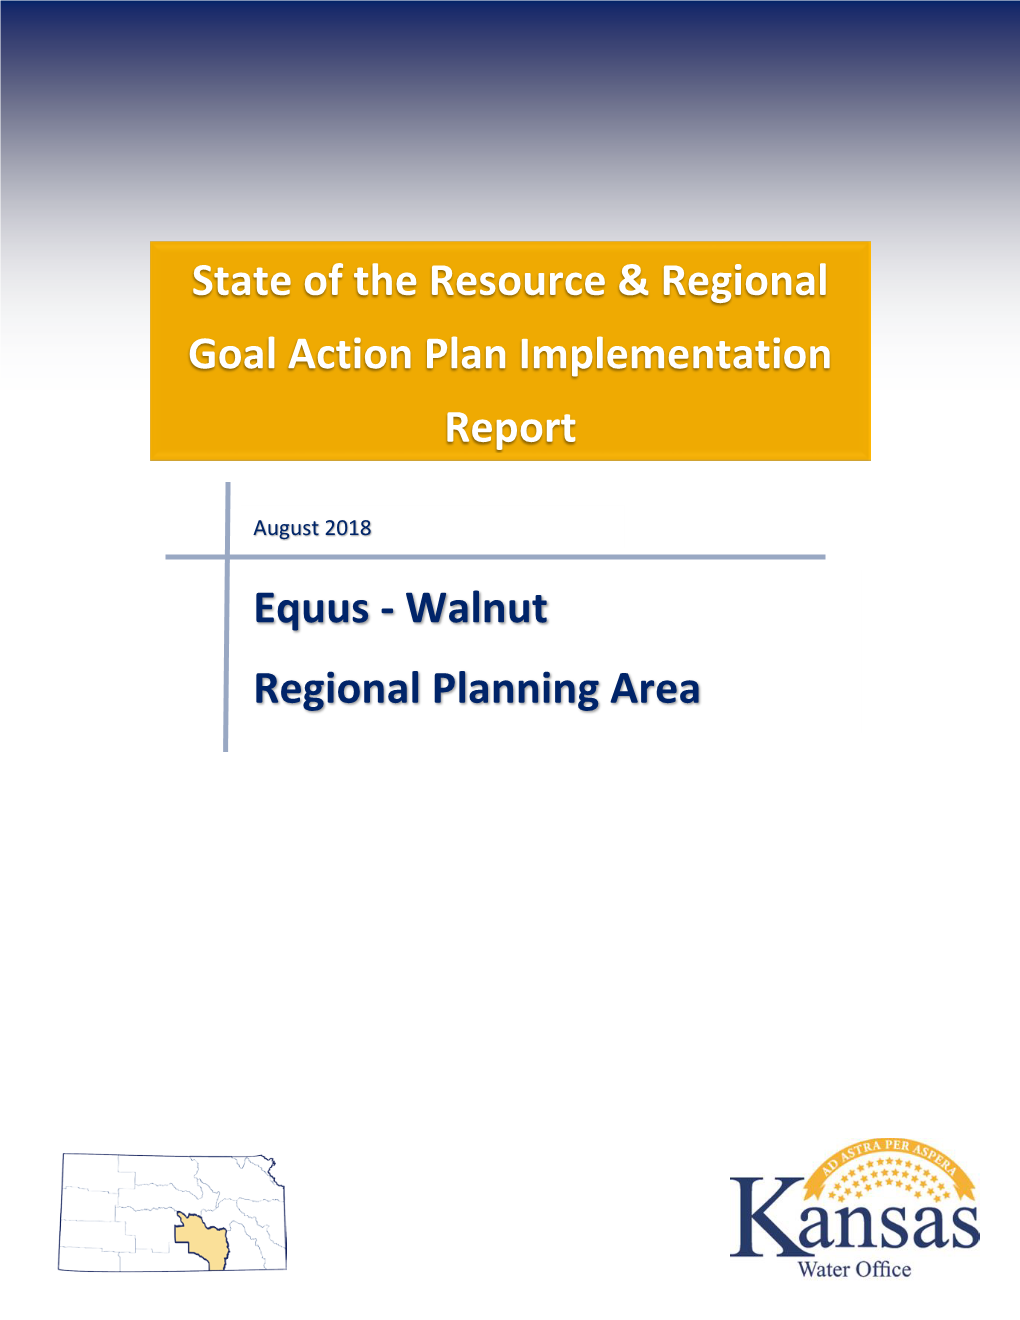 State of the Resource & Regional Goal Action Plan Implementation Report